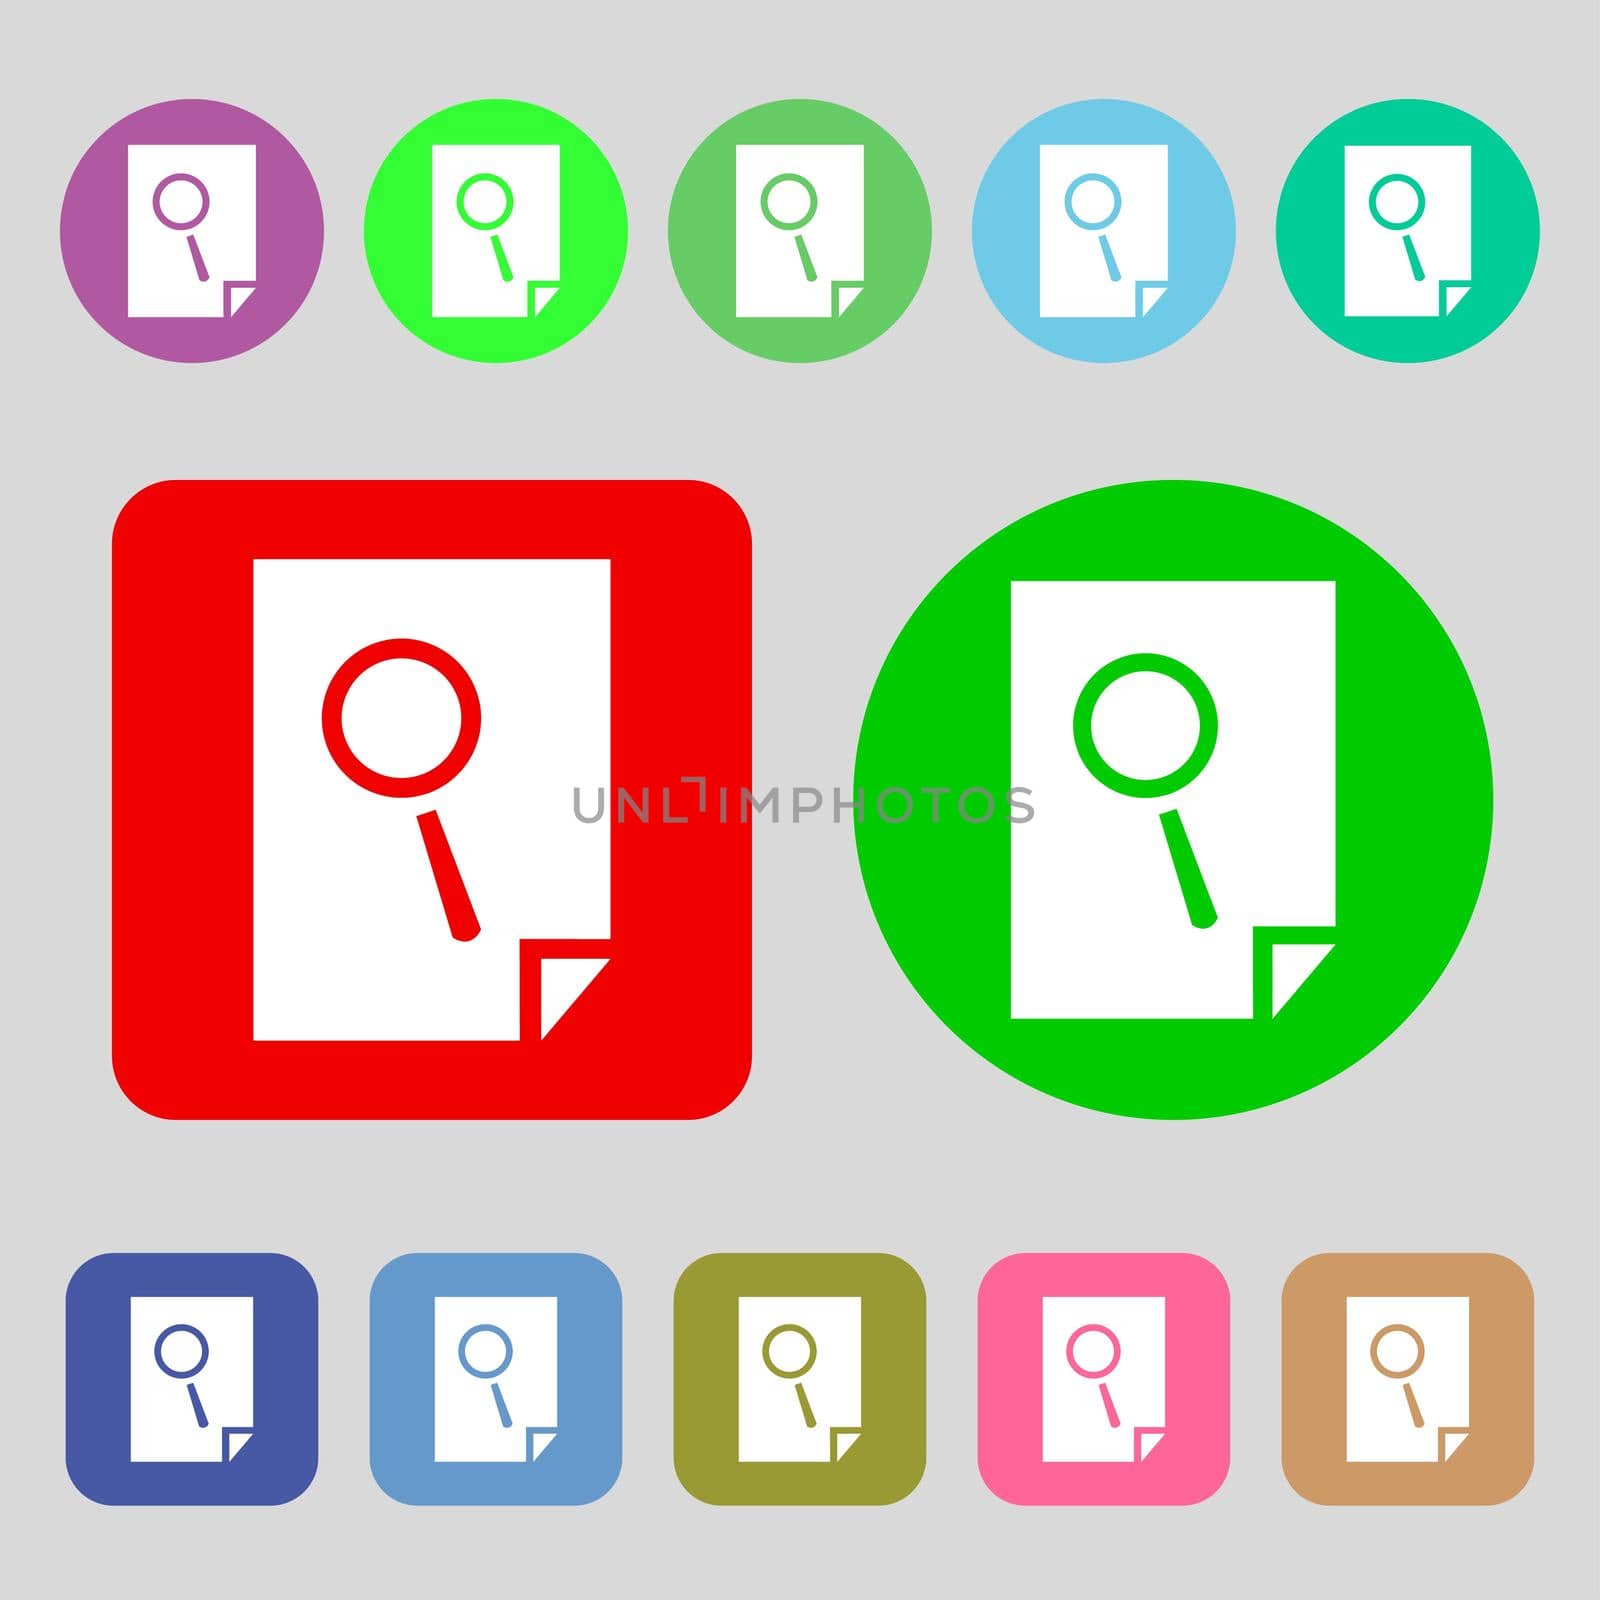 Search in file sign icon. Find in document symbol.12 colored buttons. Flat design. illustration